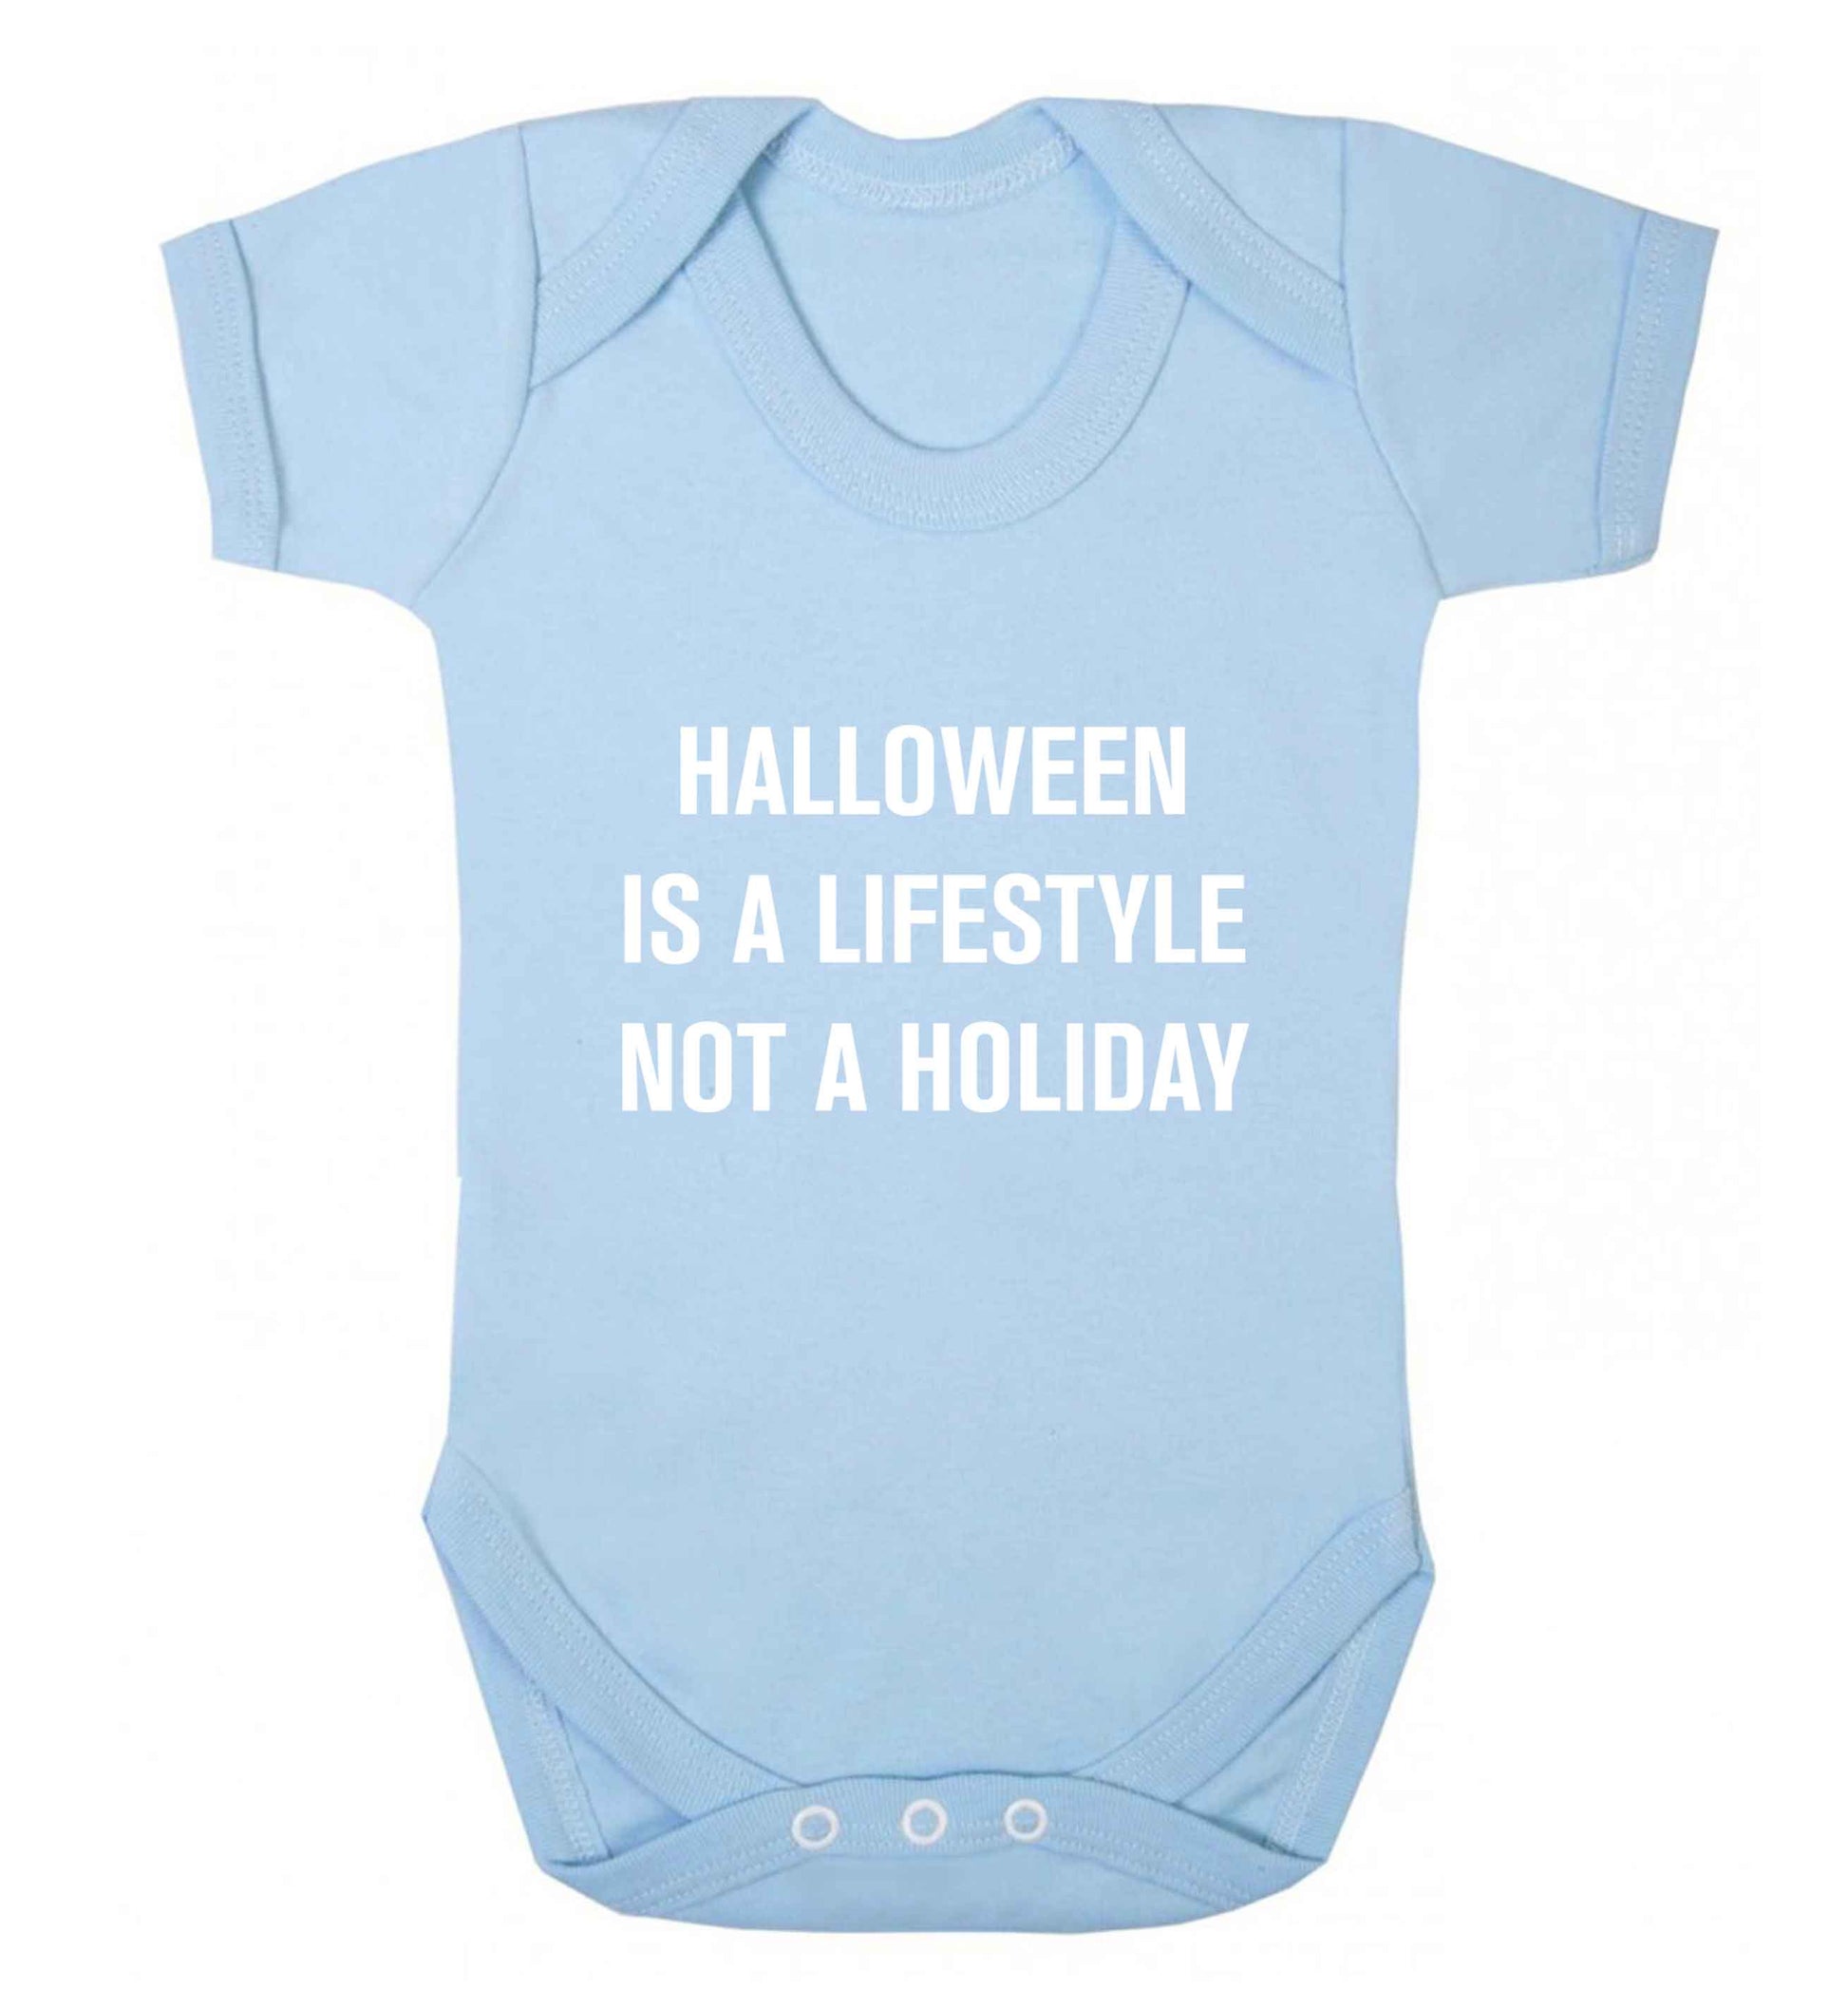 Halloween is a lifestyle not a holiday baby vest pale blue 18-24 months